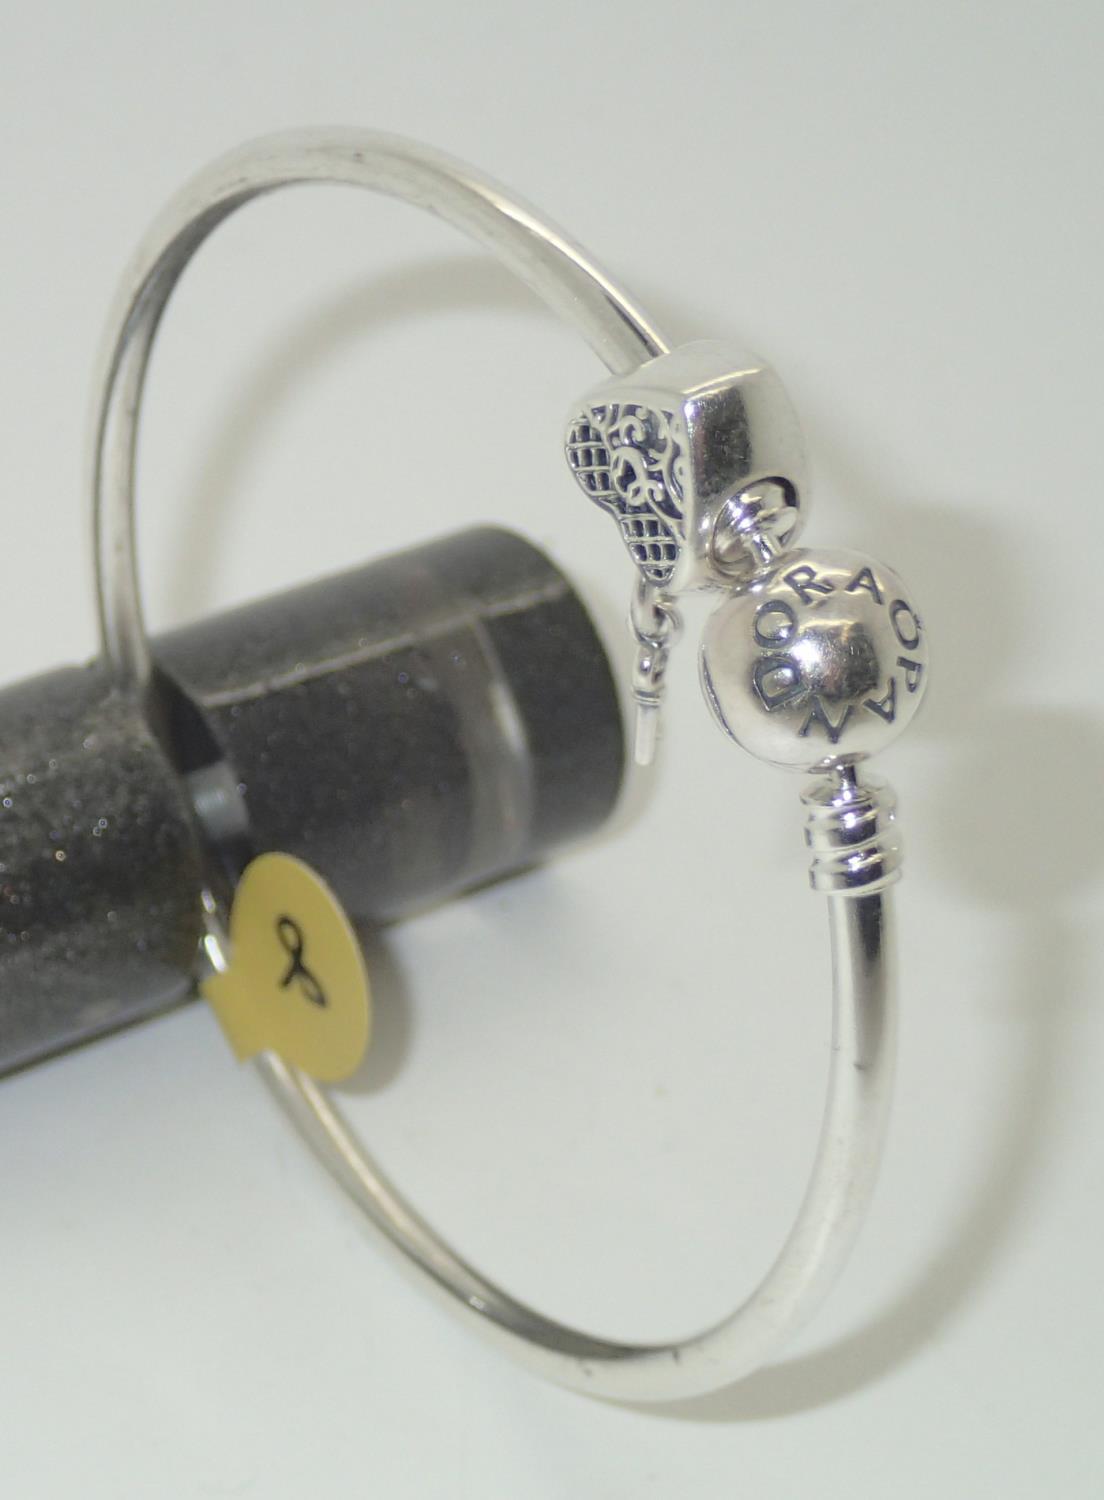 Pandora silver bangle with one charm P&P group 1 (£16 for the first item and £1.50 for subsequent